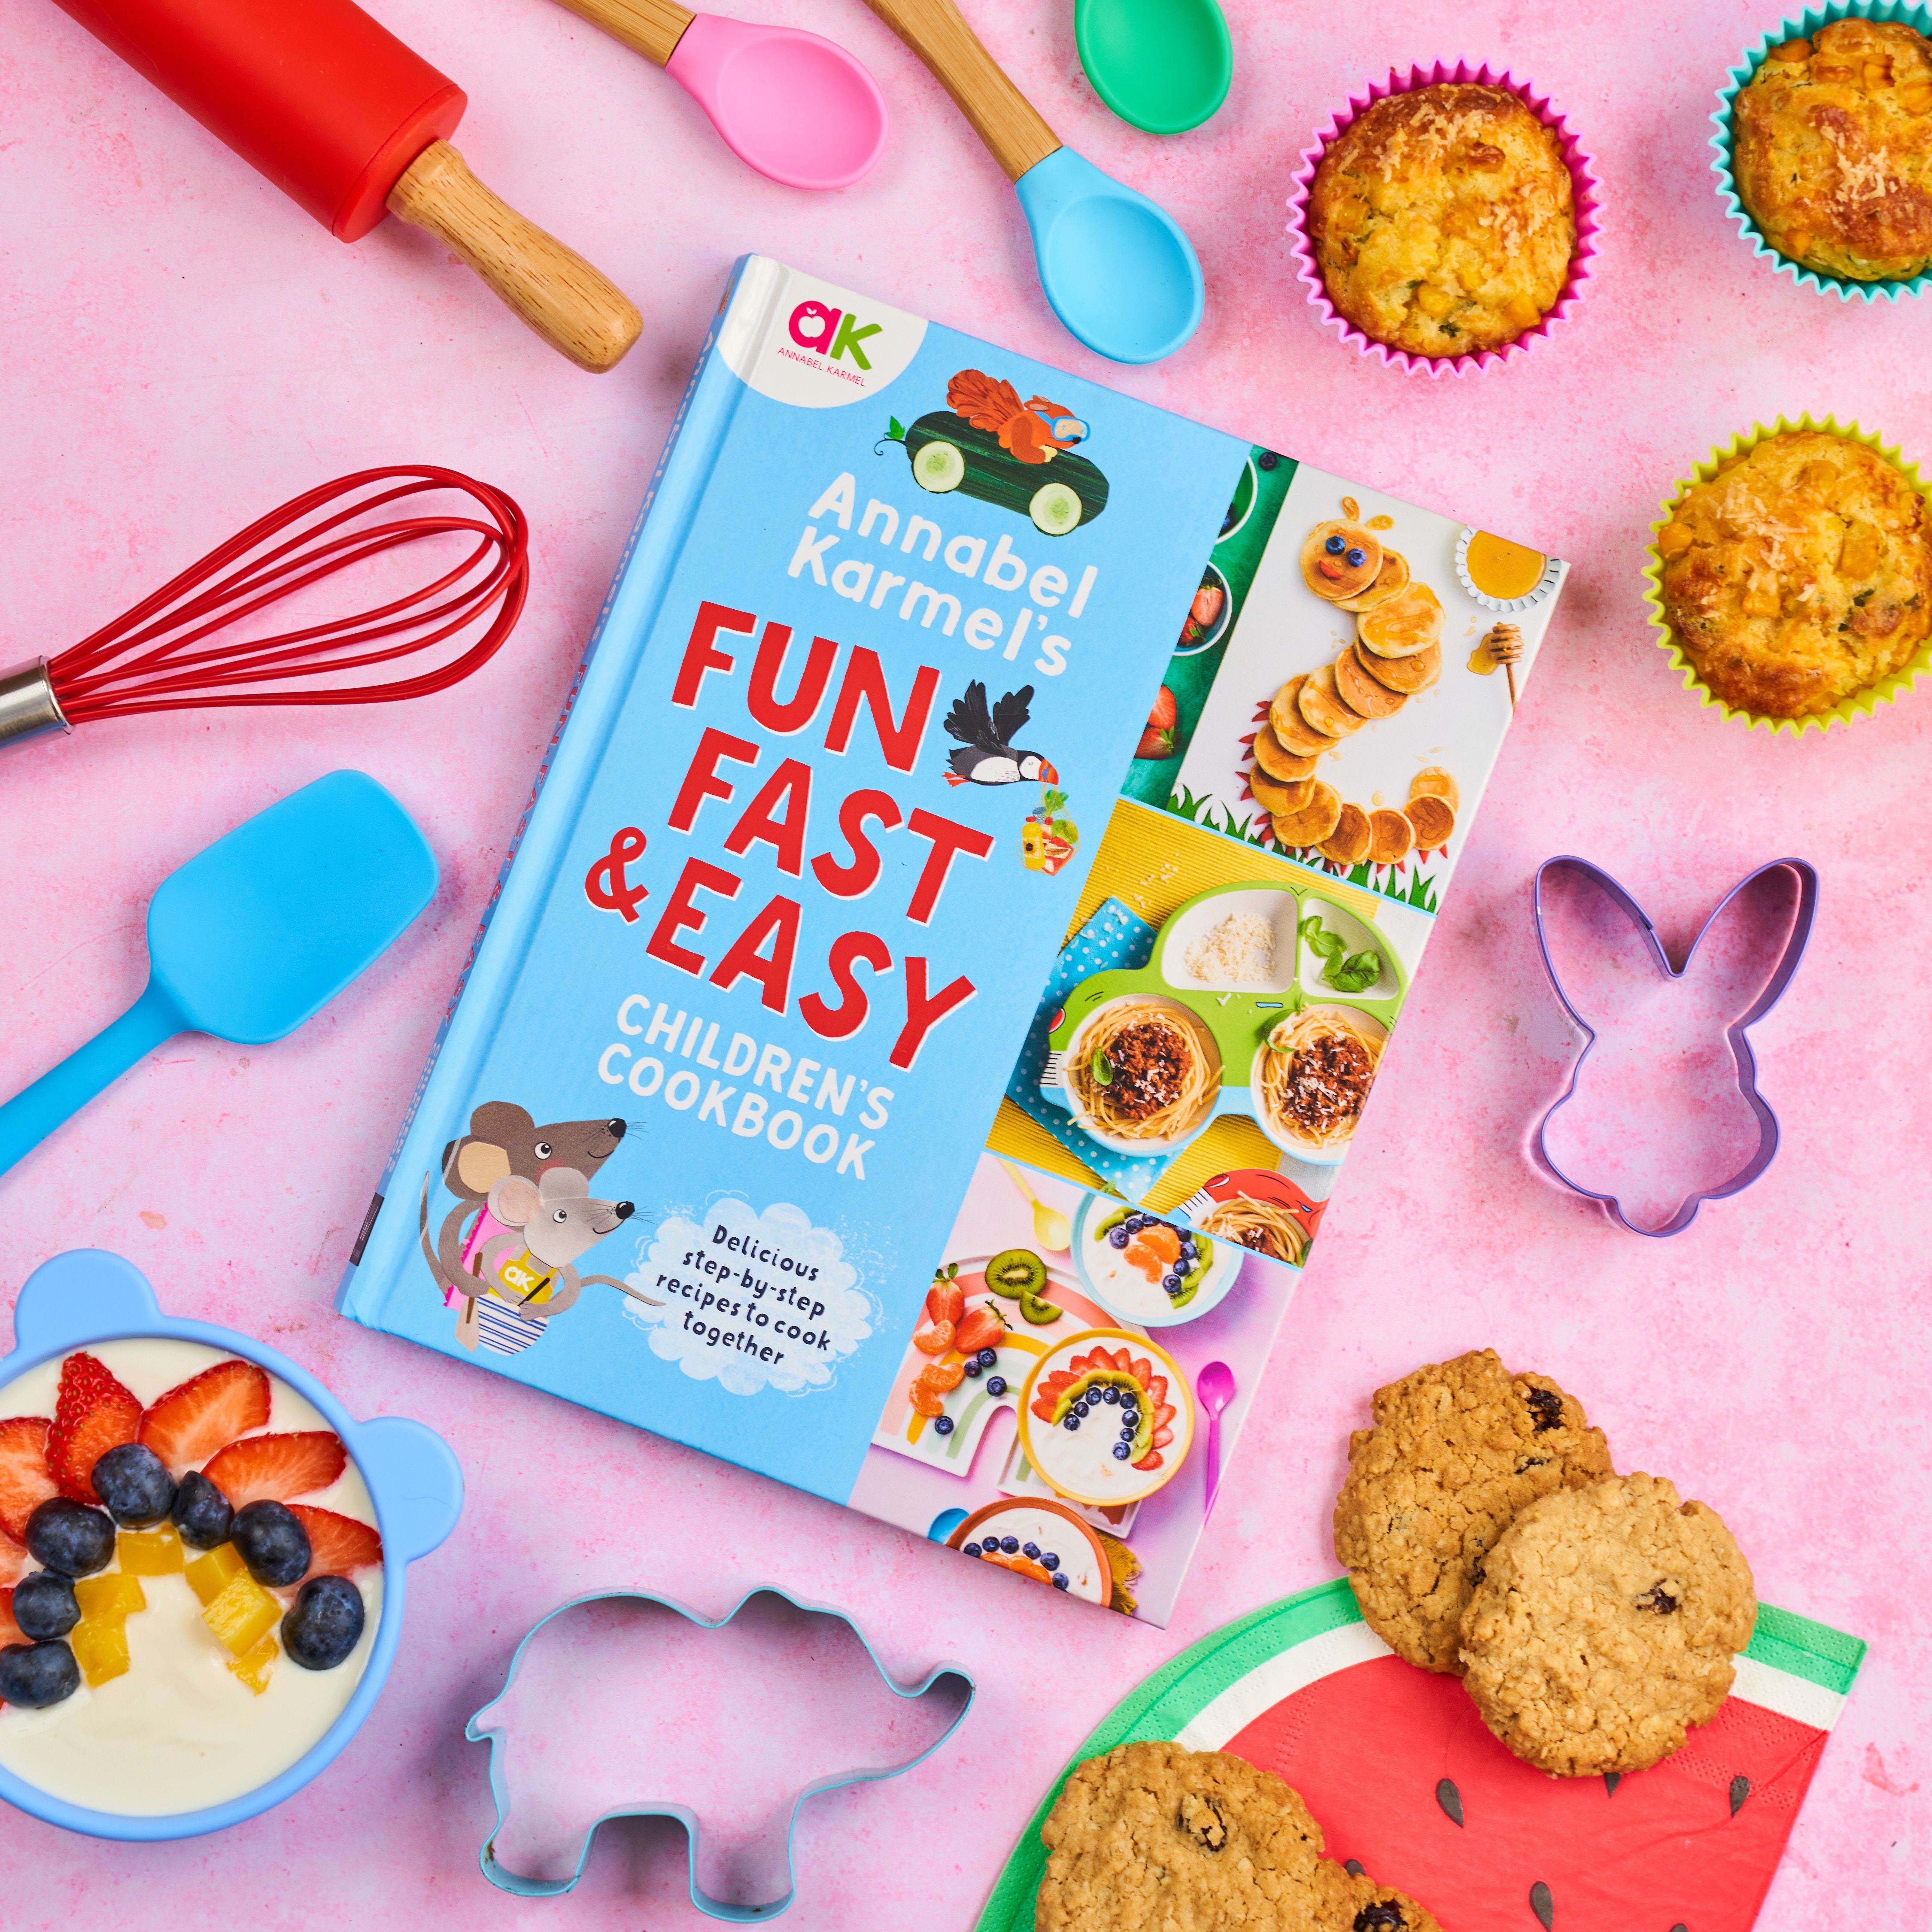 Annabel Karmel and Welbeck Publishing reinvent family cooking with  Annabel Karmel’s Fun, Fast and Easy Children’s Cookbook.